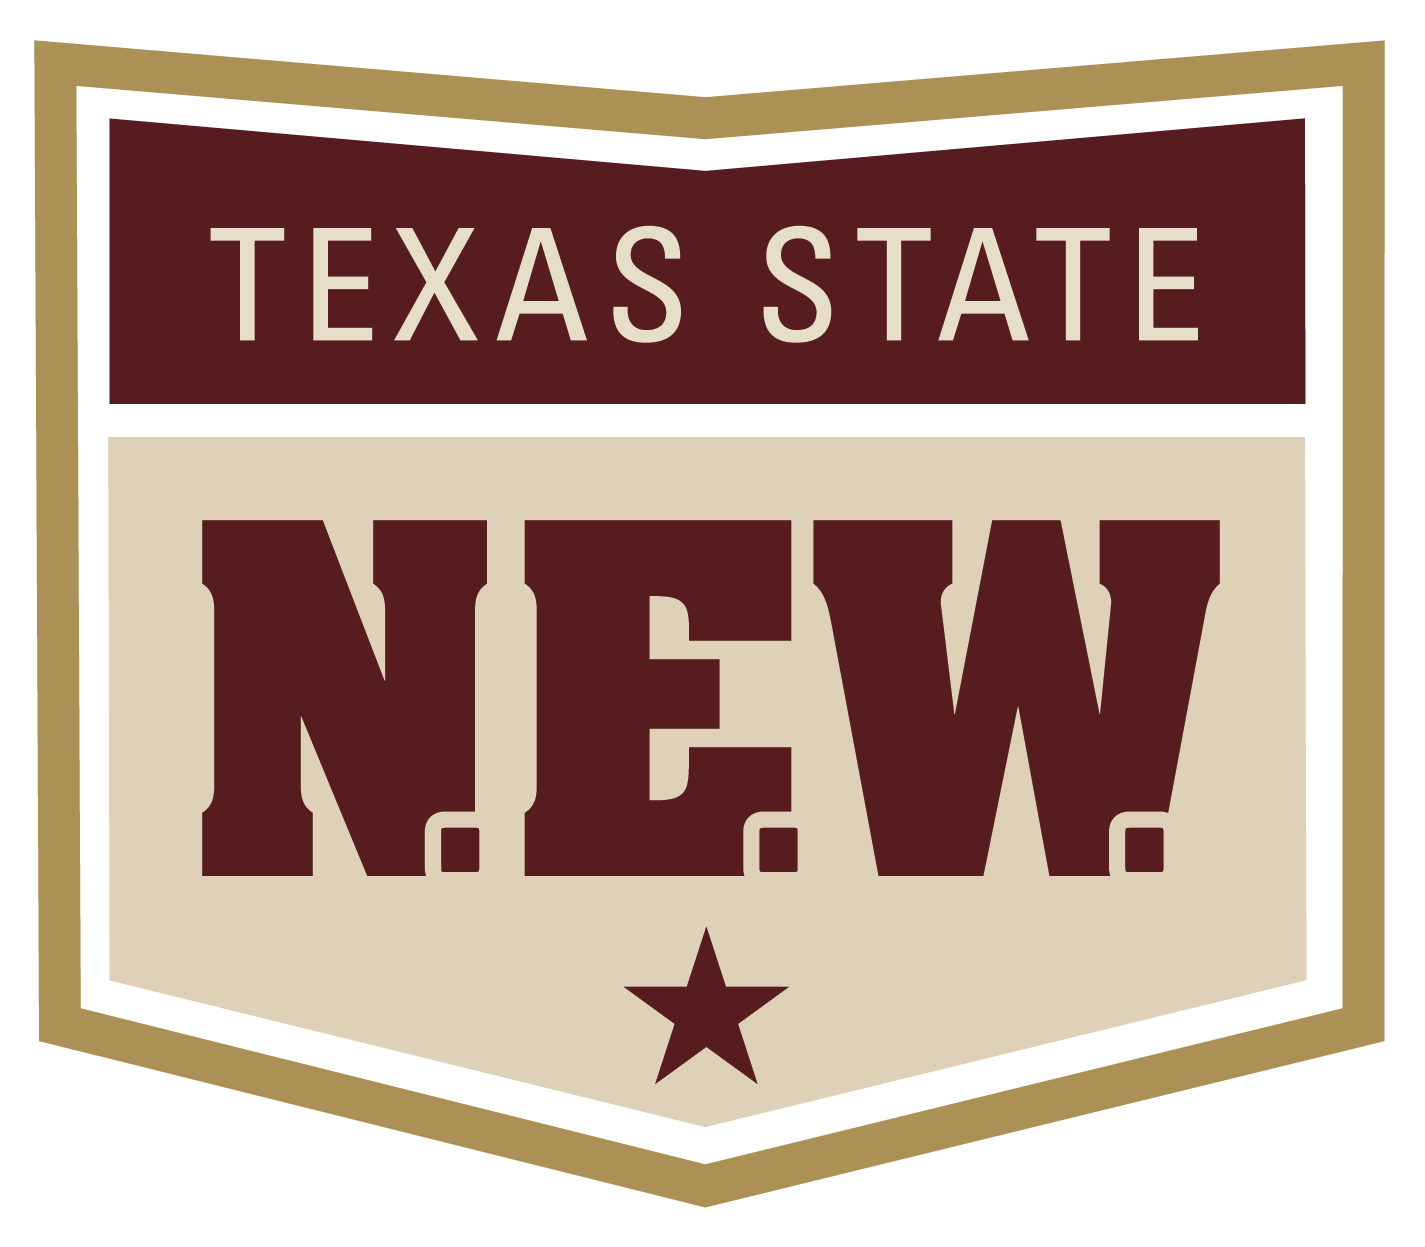 Texas State New Employee Welcome badge